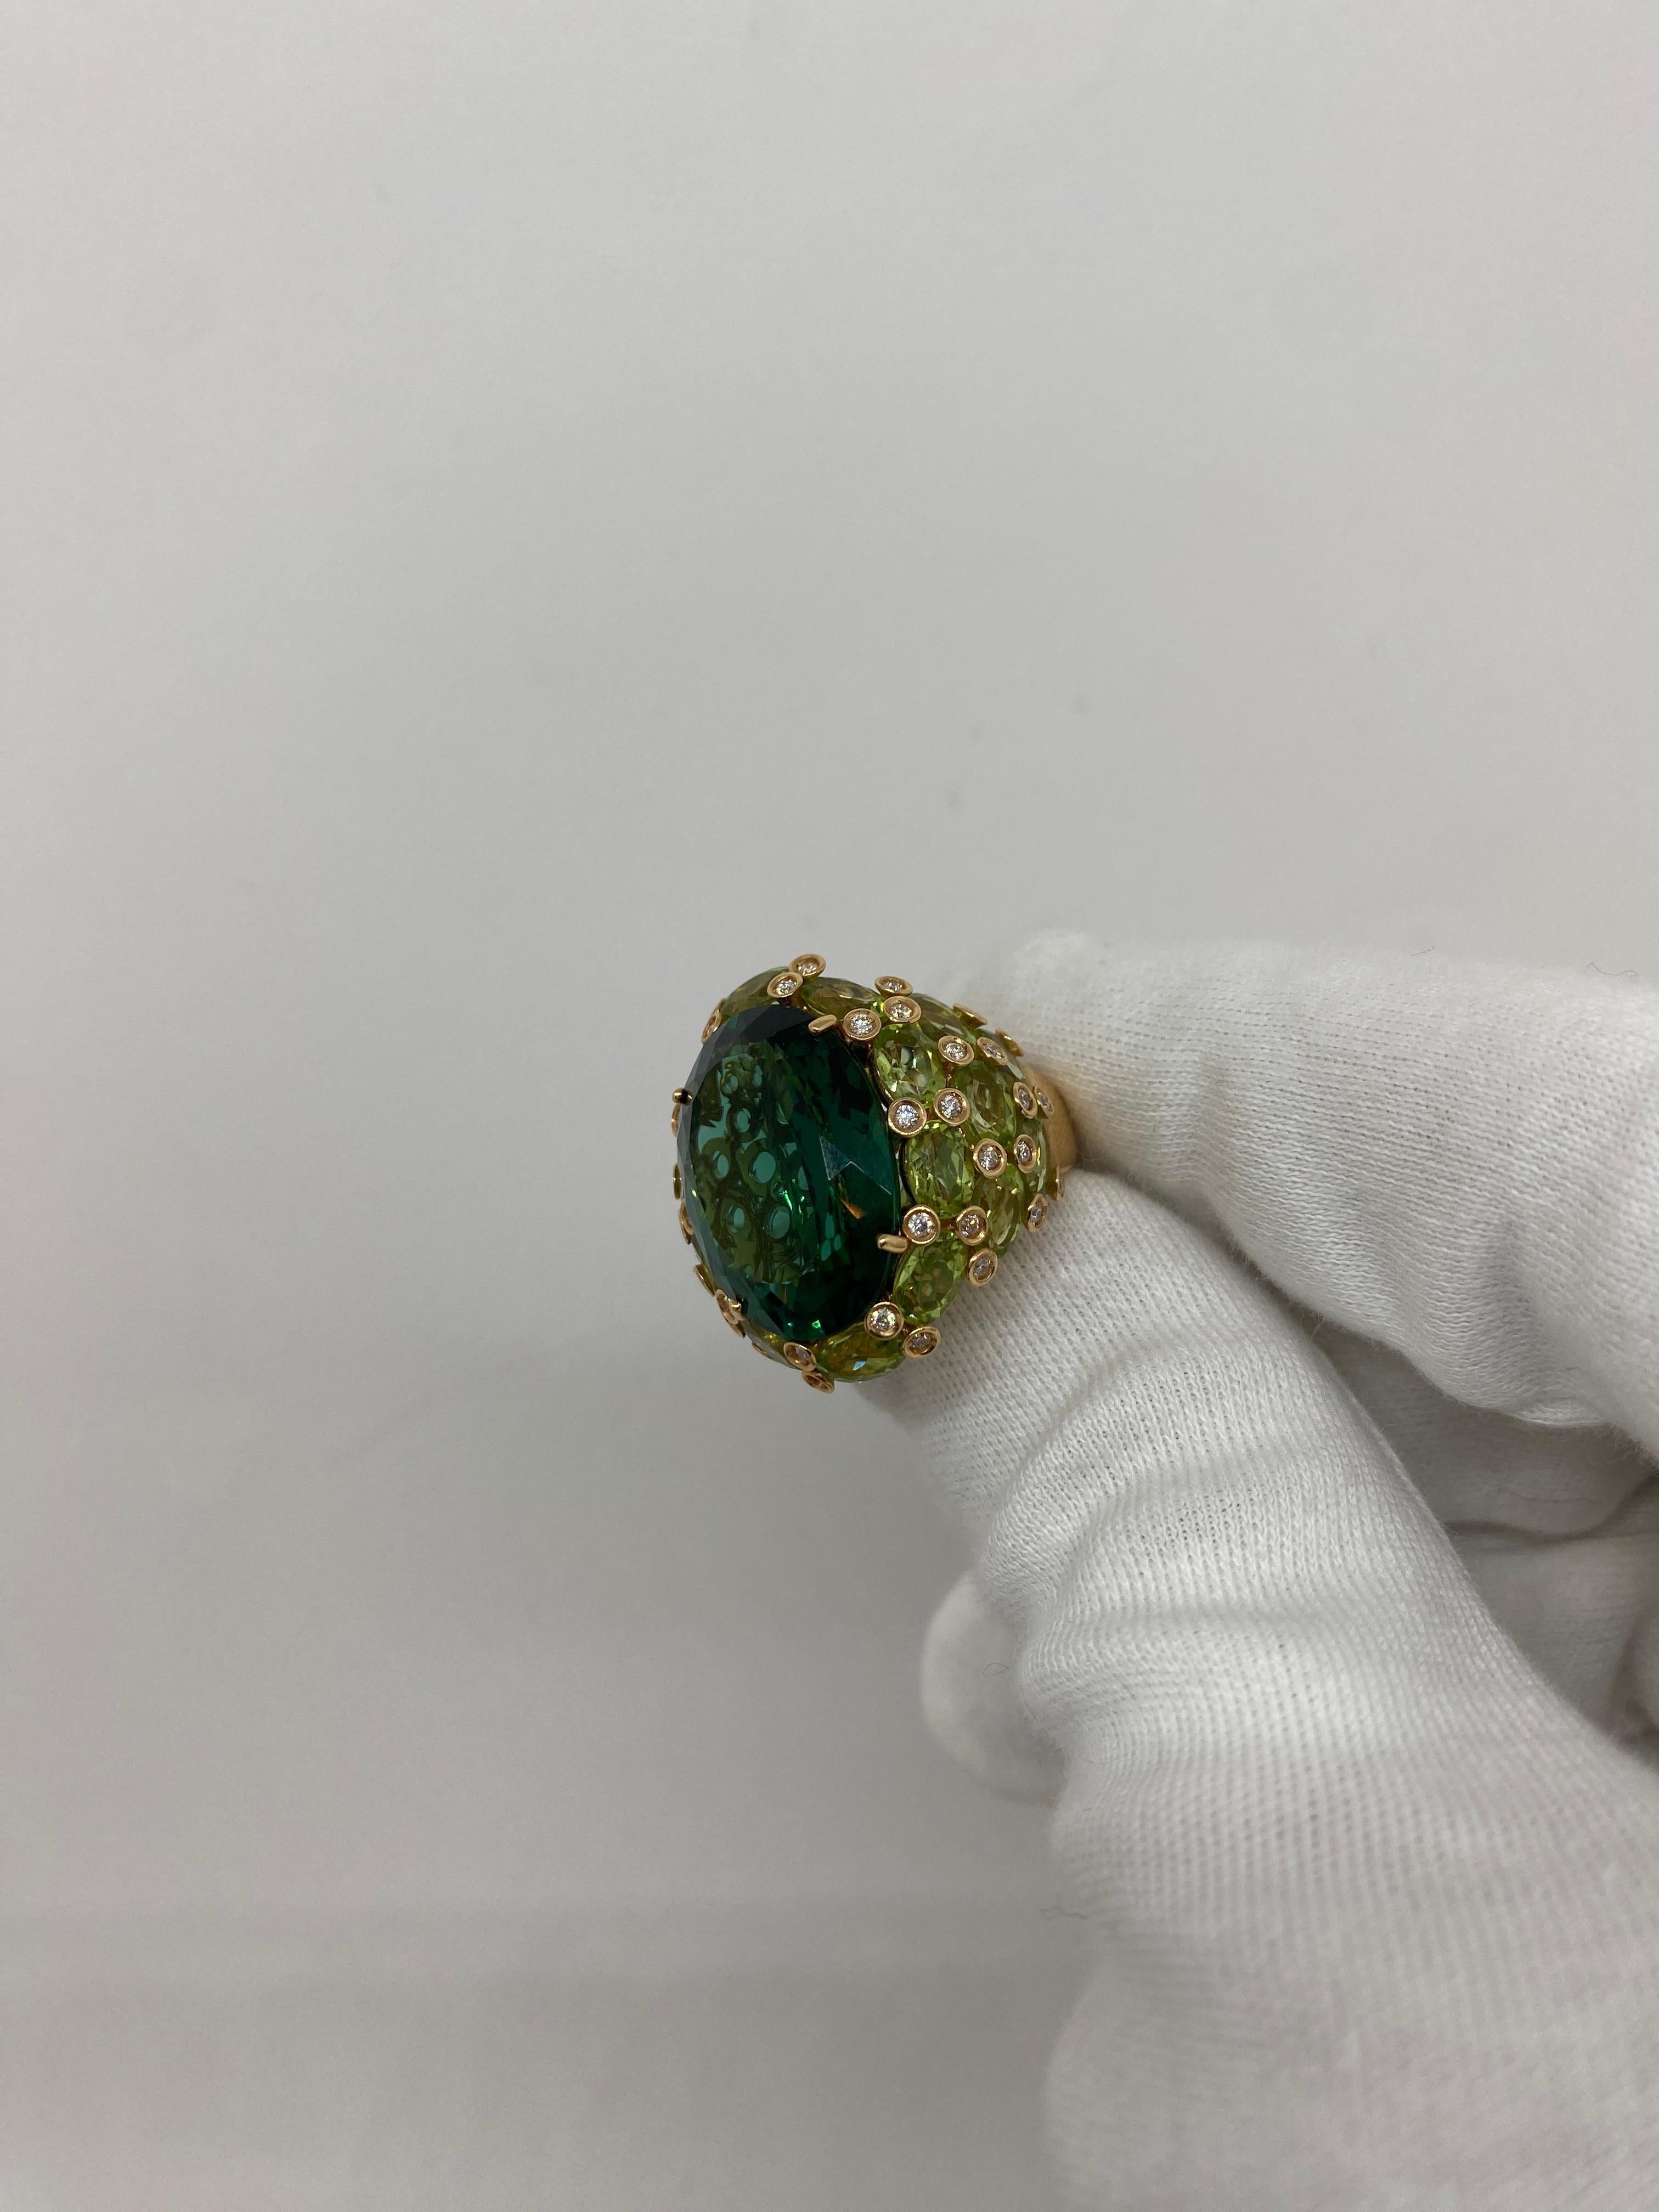 Ring made of 18kt rose gold with oval-cut green quartz and natural white brilliant-cut diamonds for ct.0.49 and peridot

Welcome to our jewelry collection, where every piece tells a story of timeless elegance and unparalleled craftsmanship. As a